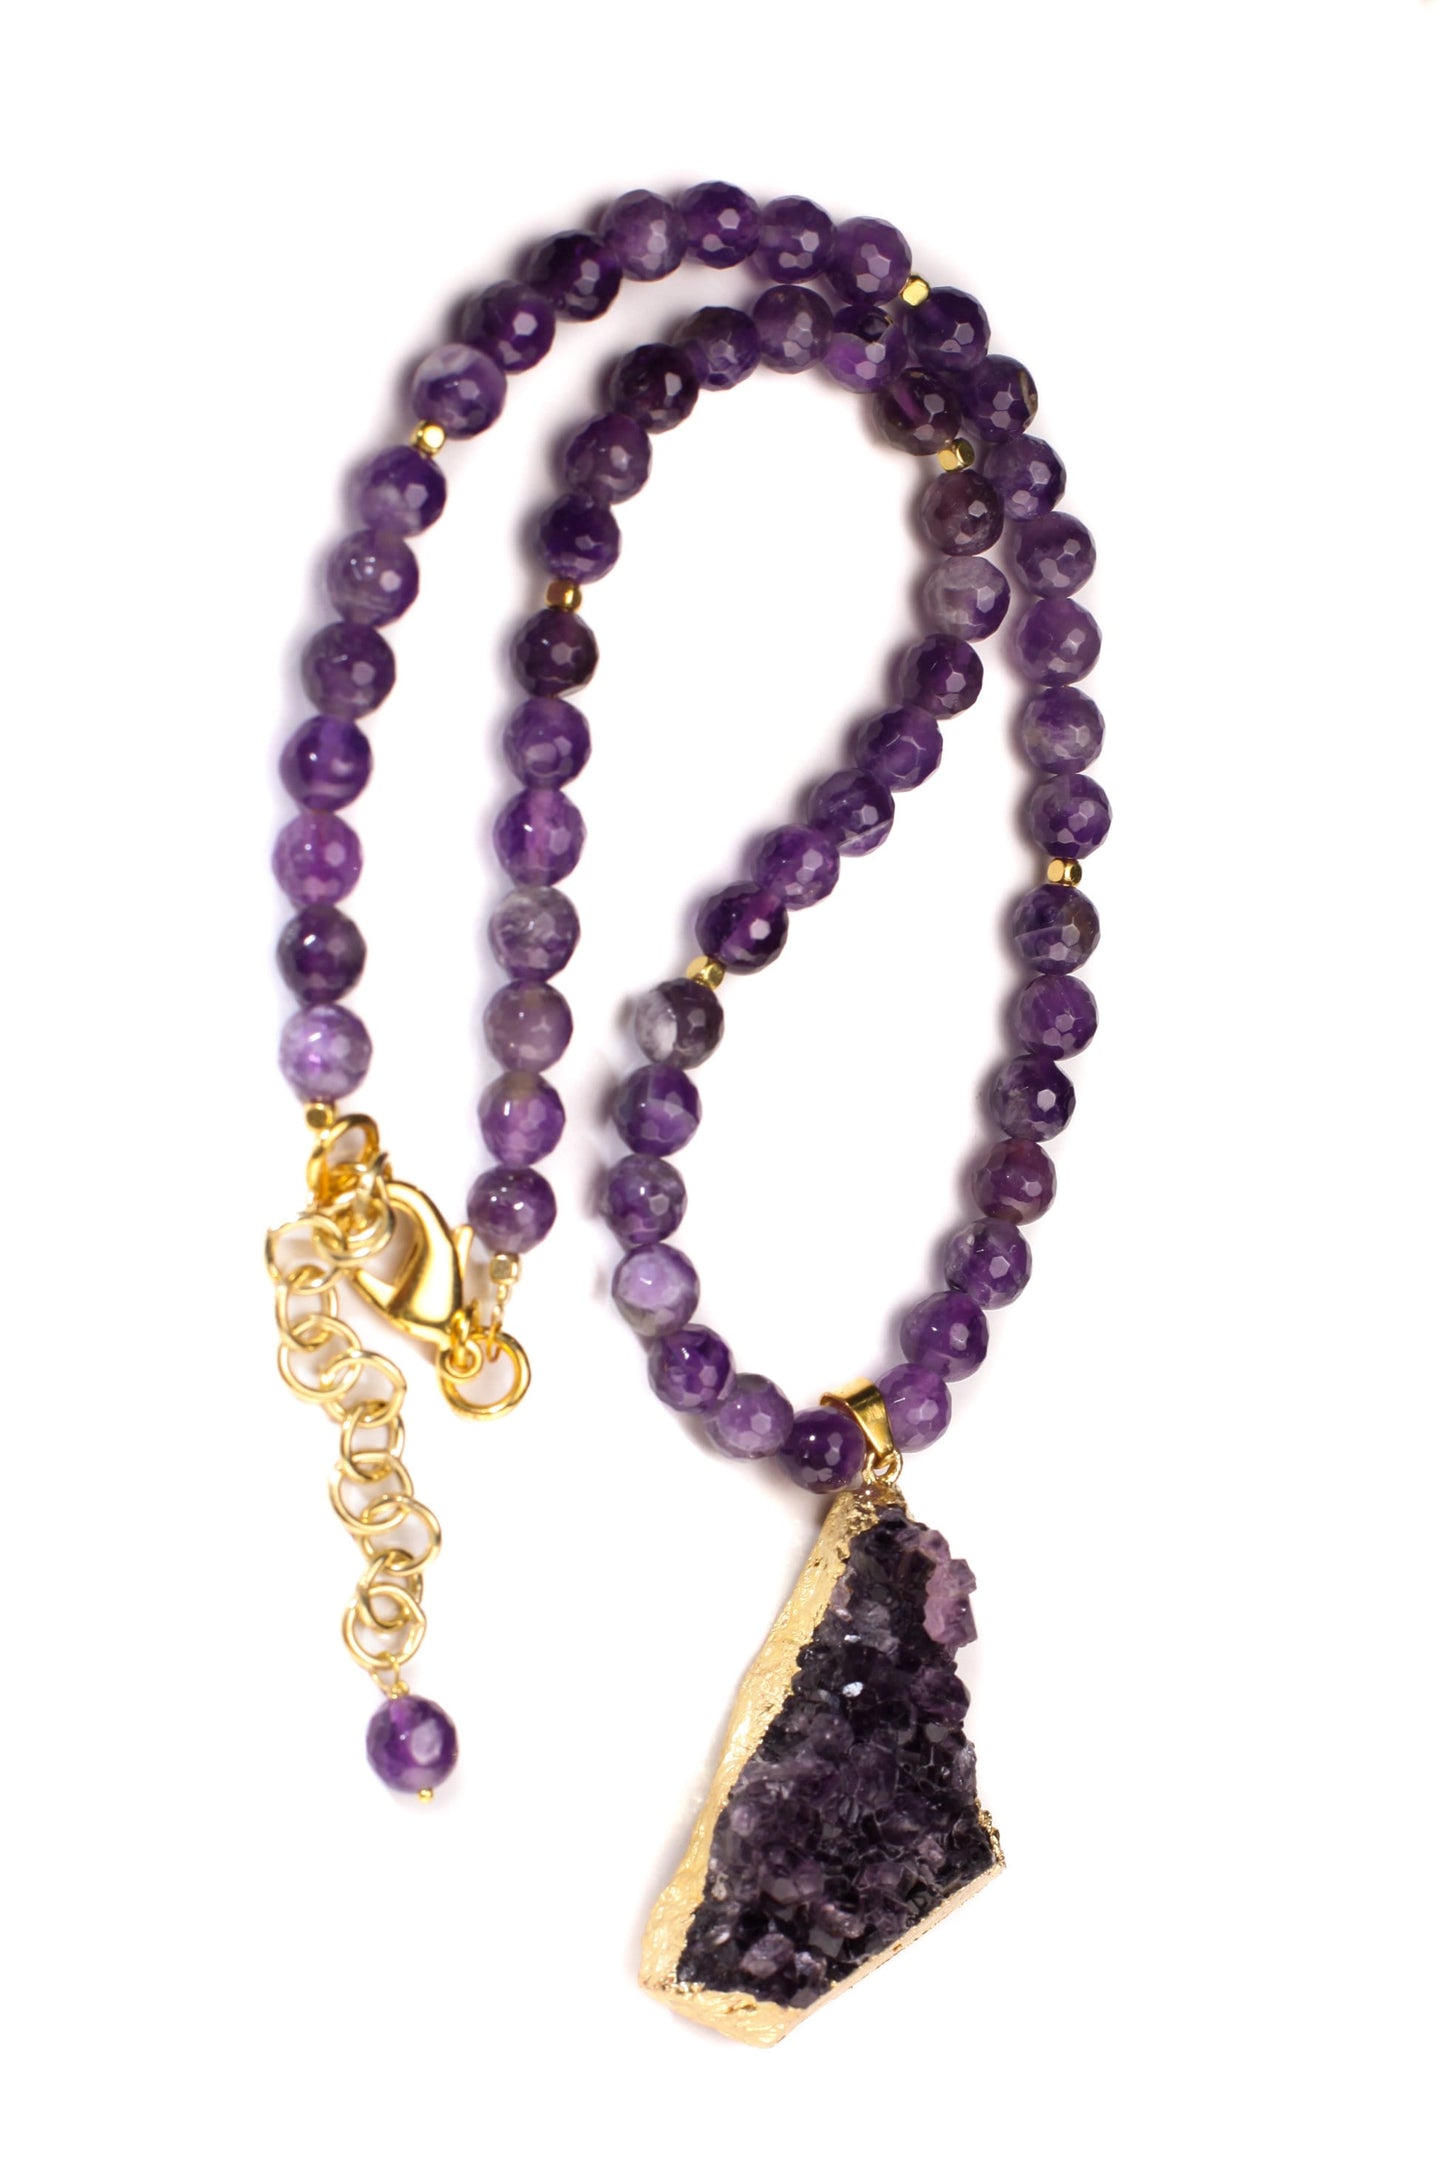 Amethyst Geode Raw Druzy Chunk 30x47mm long , 16mm thick Pendant, 8mm Natural Faceted Amethyst bead 18”gold Necklace 2" Extension Chain